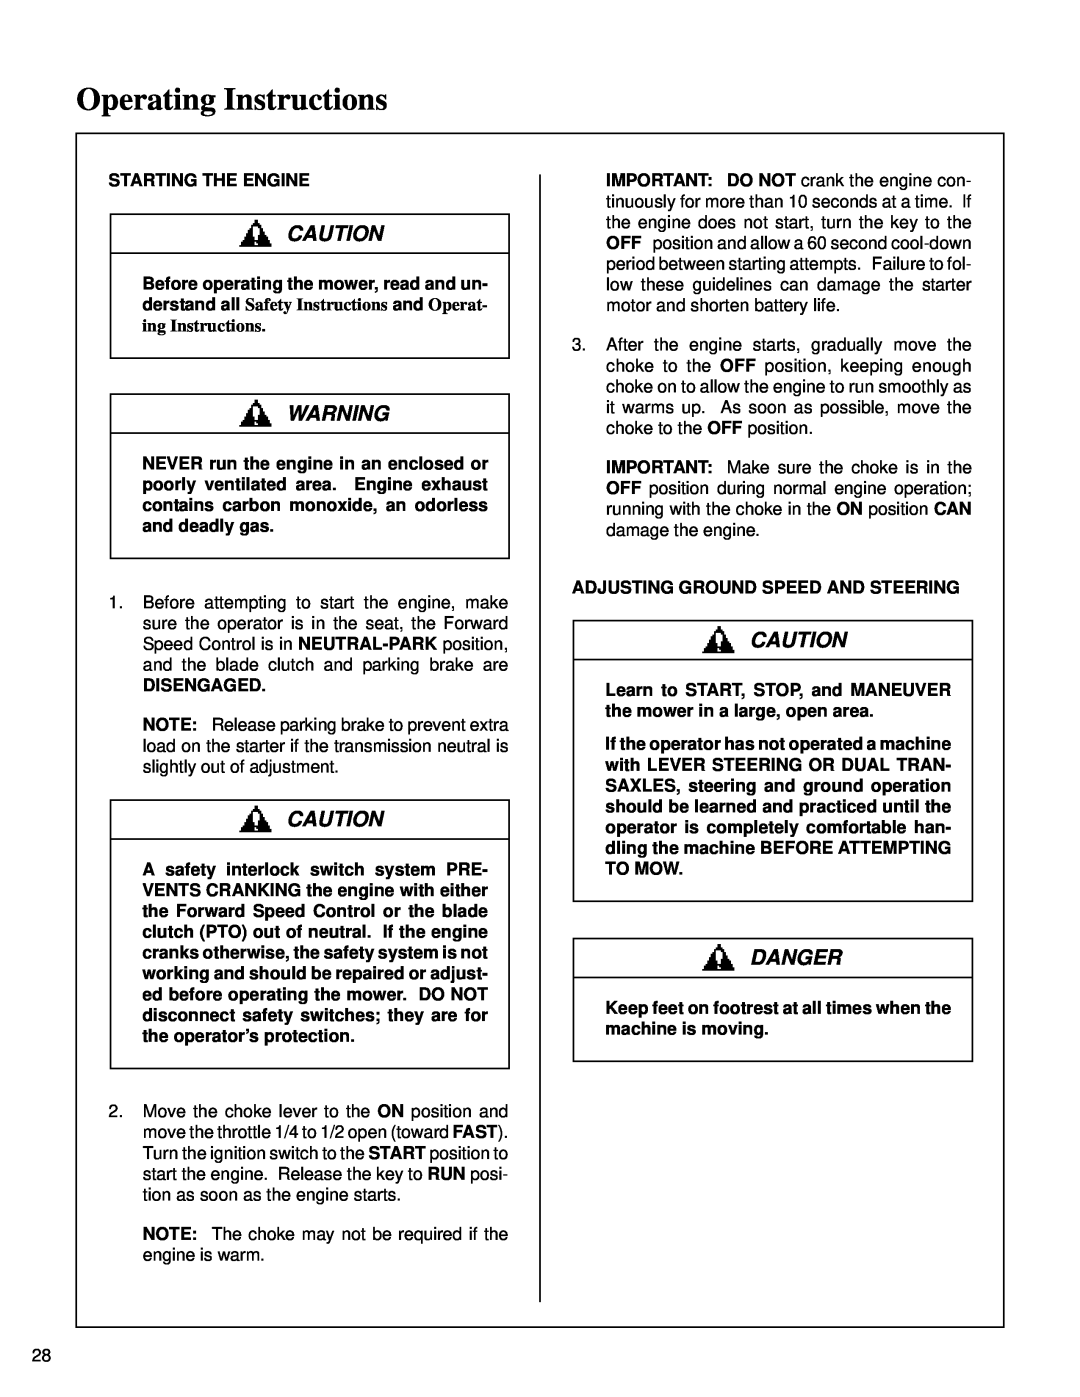 Briggs & Stratton MB (18 HP) owner manual Operating Instructions, Danger, Starting The Engine, Disengaged 